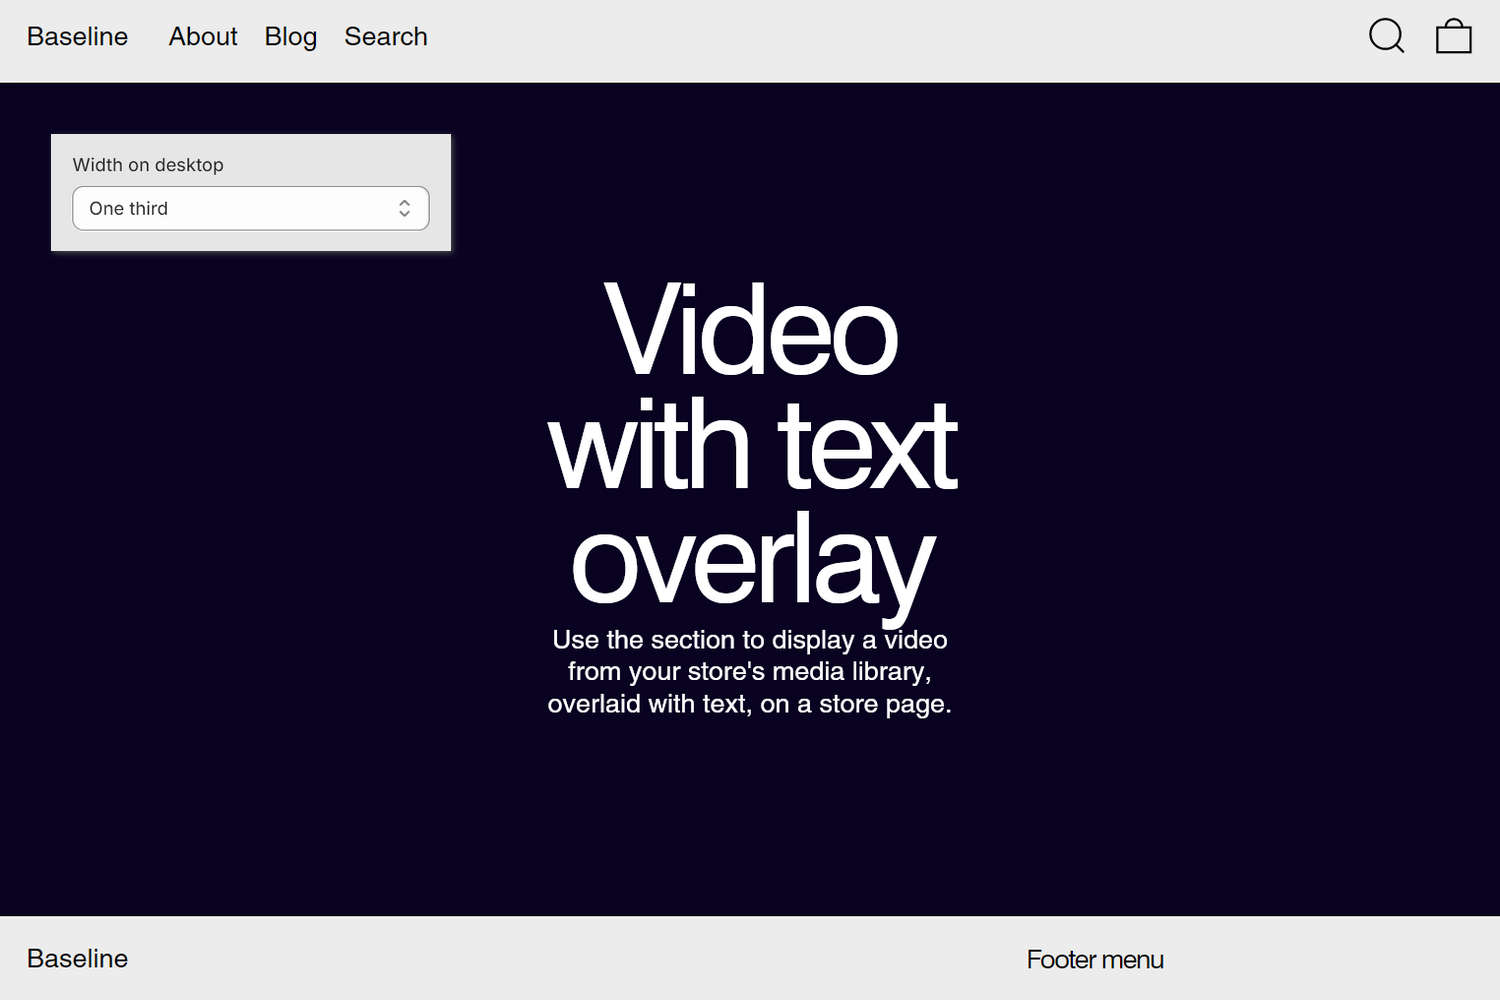 An example Video with text overlay section on a store's home page.